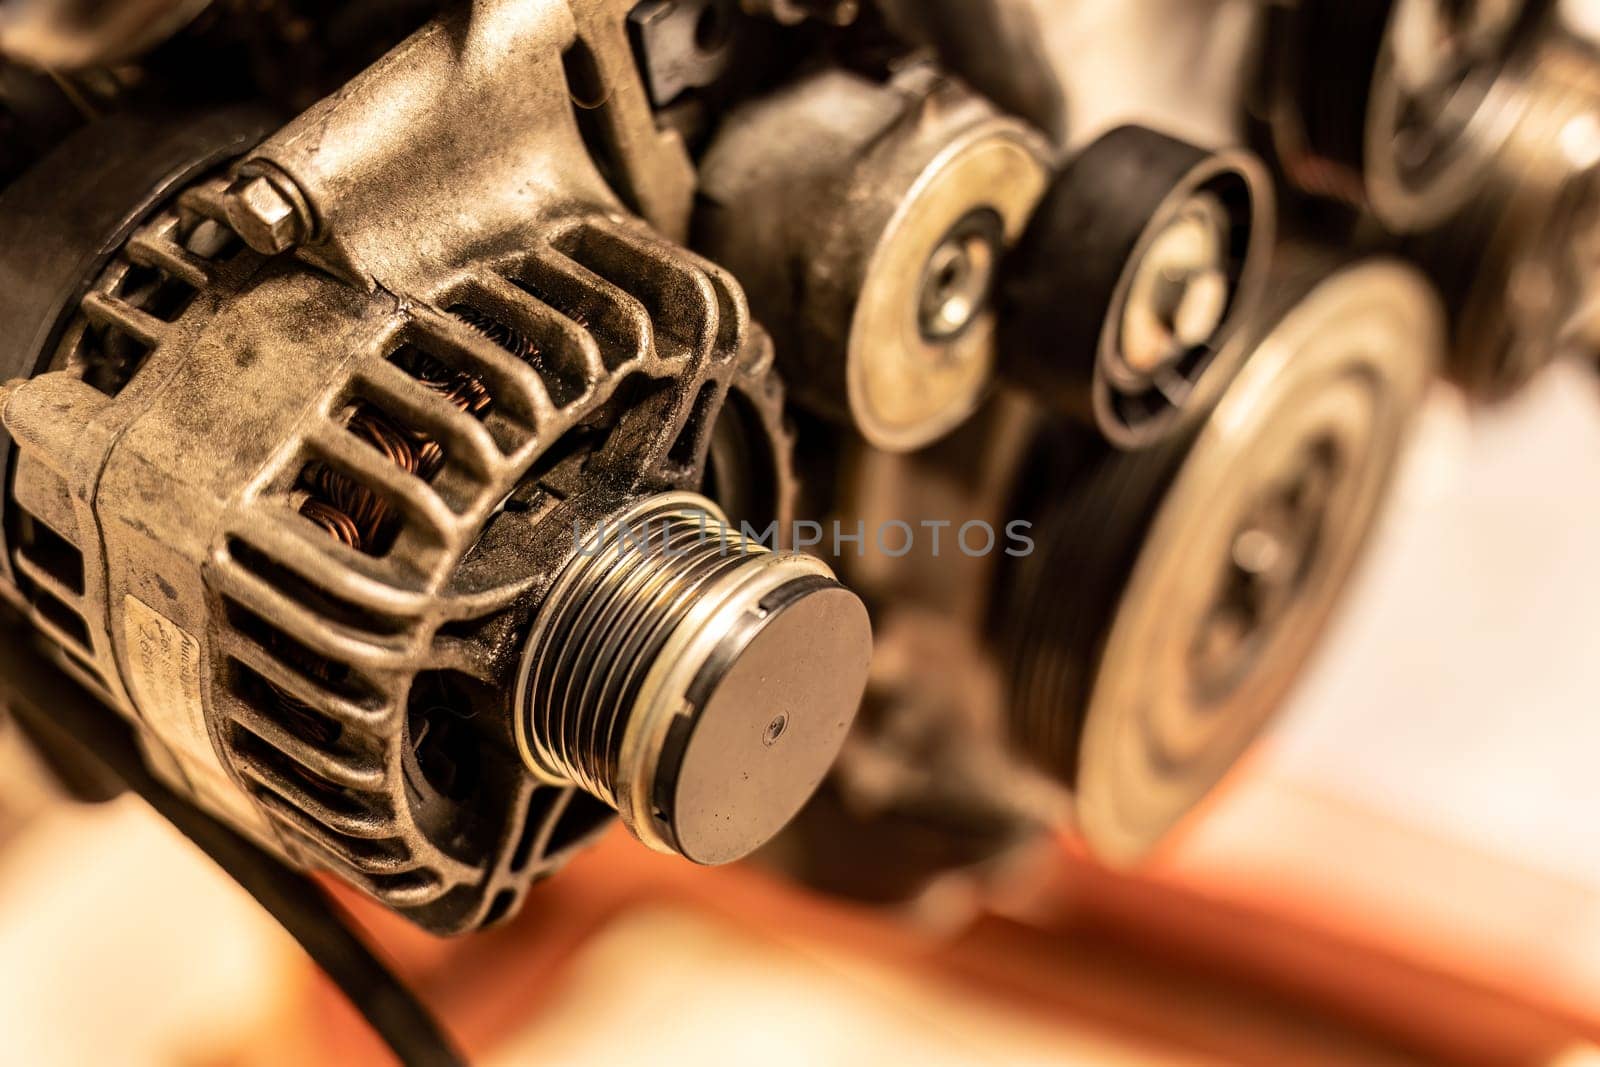 Detailed image of an alternator pulley attached to a car engine, showcasing intricate mechanical parts.